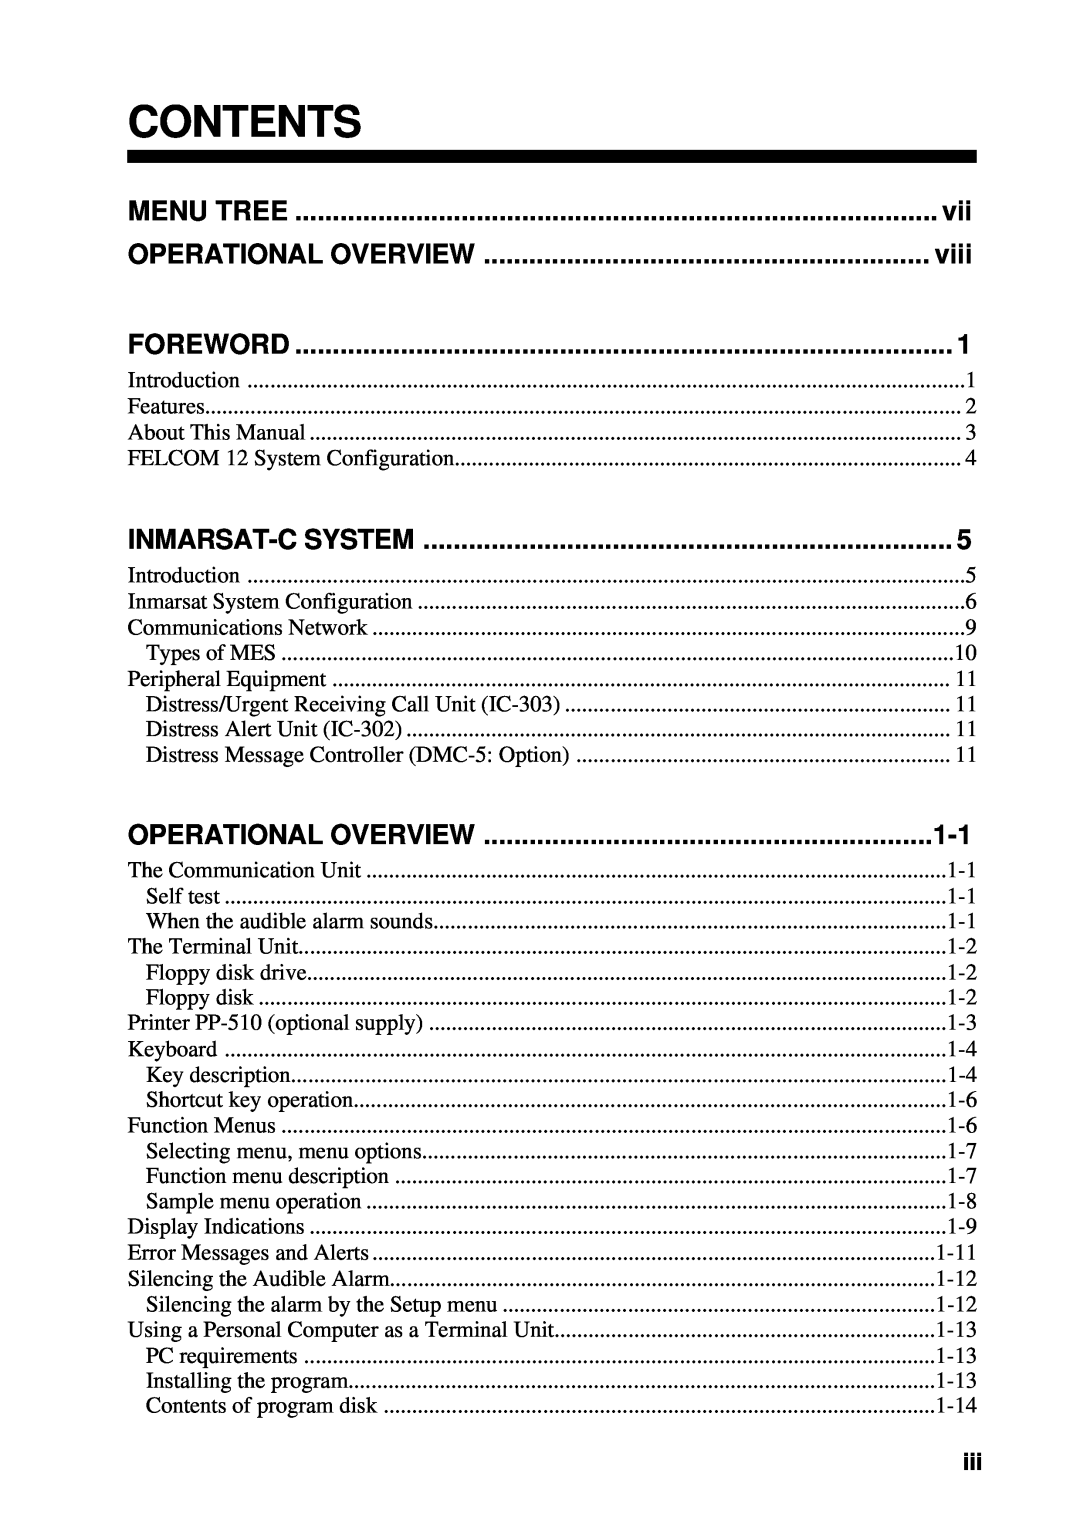 Furuno RC-1500-1T manual Contents, viii, Menu Tree, Operational Overview, Inmarsat-C System, Foreword 